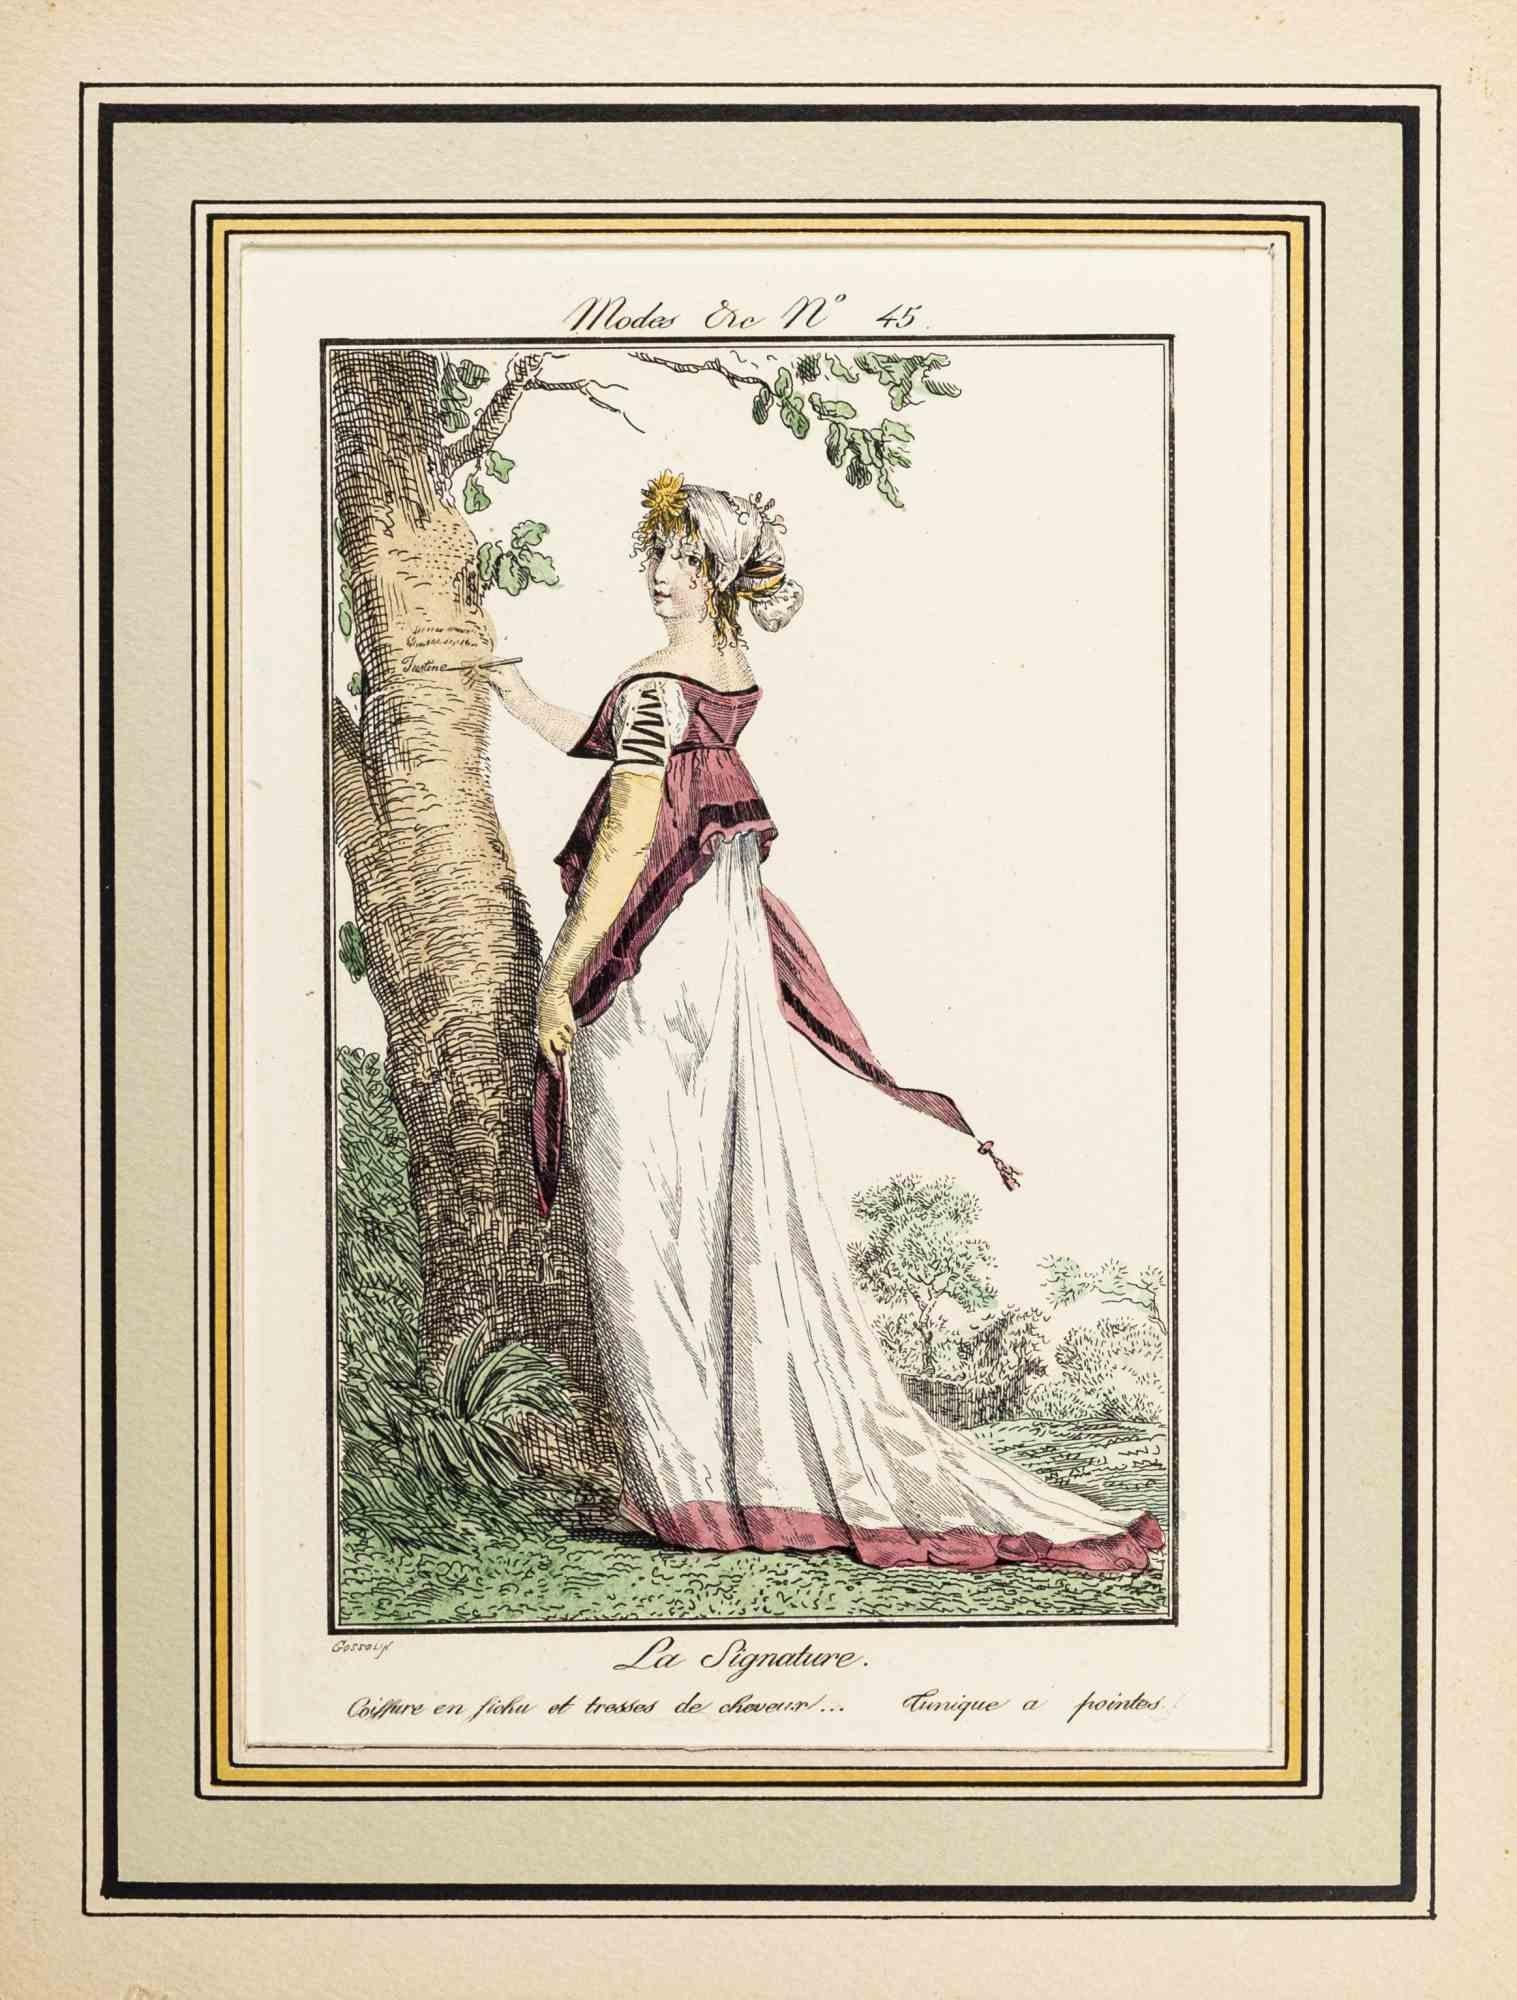 La Signature is an Original Etching Hand Watercolored series "Costumes Parisiens" published in 1797 by the Journald des Dames et des Modes".

Costume Parisien - Model n.  is 45 an original watercolored print realized in 1797. 

The artwork is the